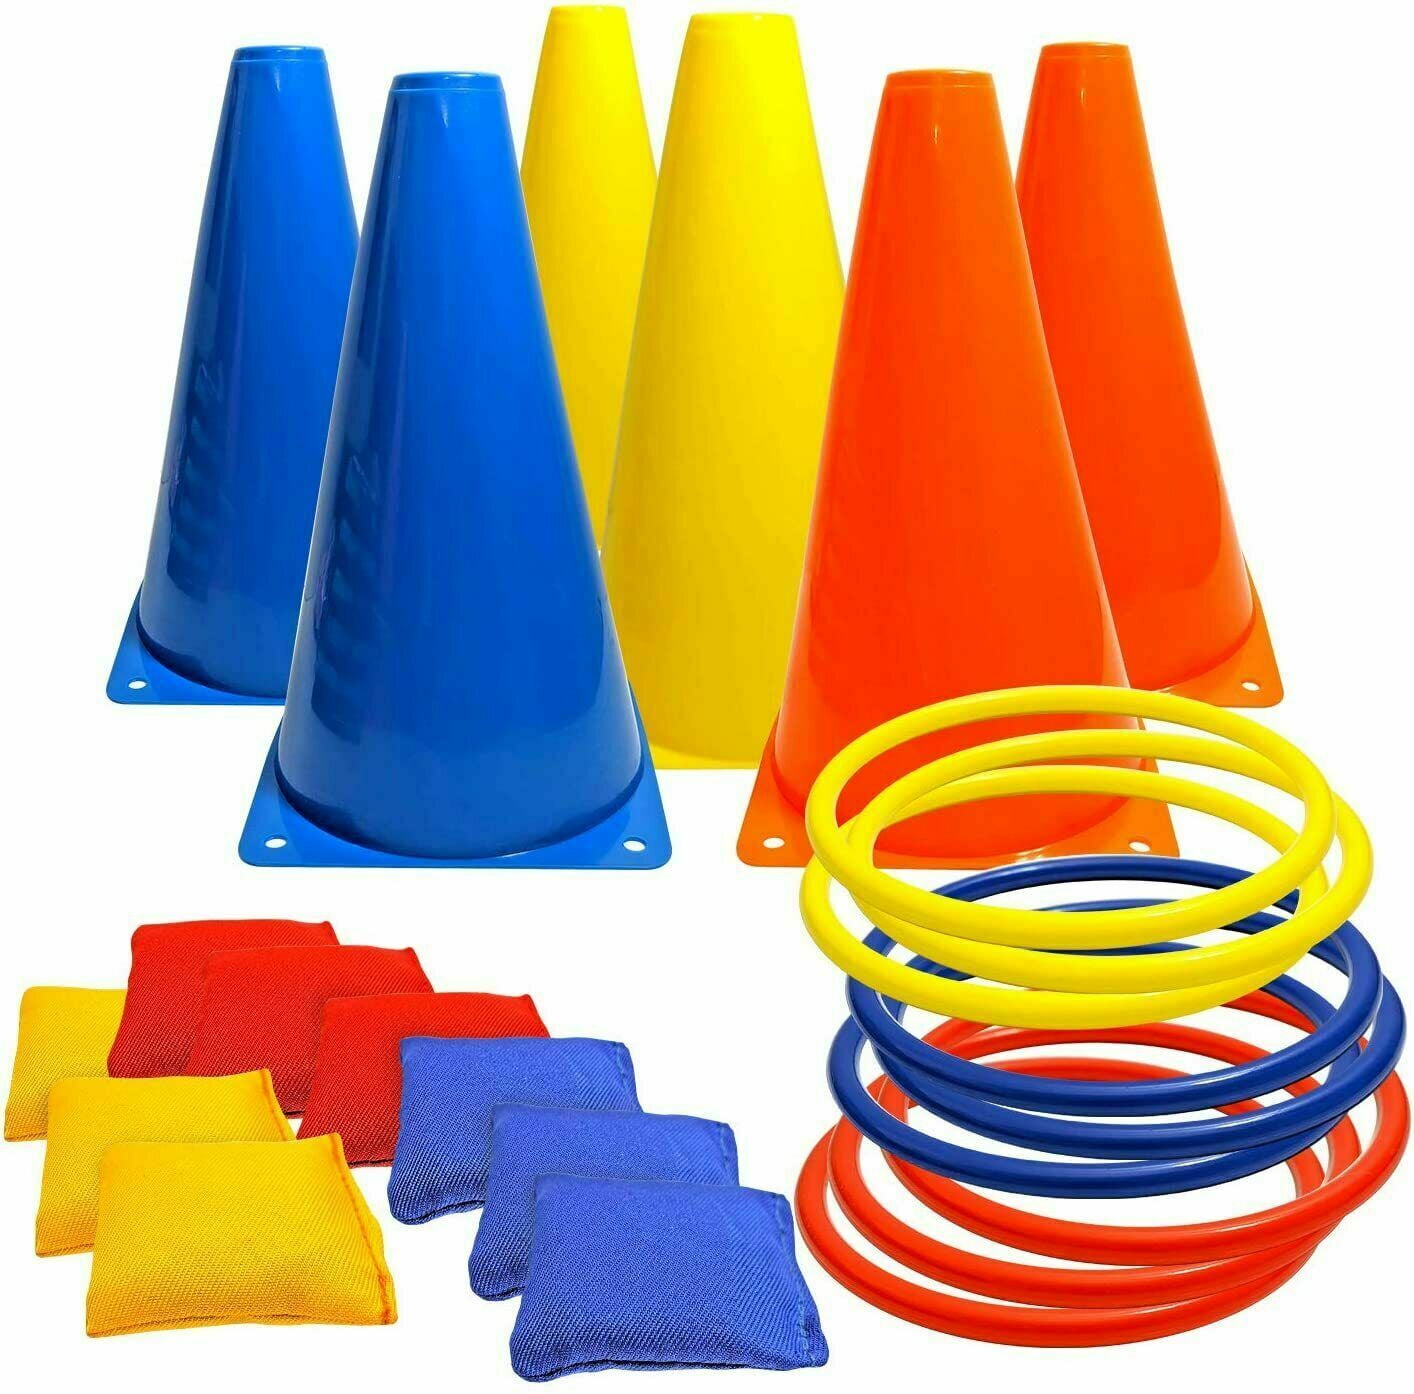 3 In 1 Traffic Throw Hoop Family Outdoor Games Cone Bean Bags Ring Toss Game 